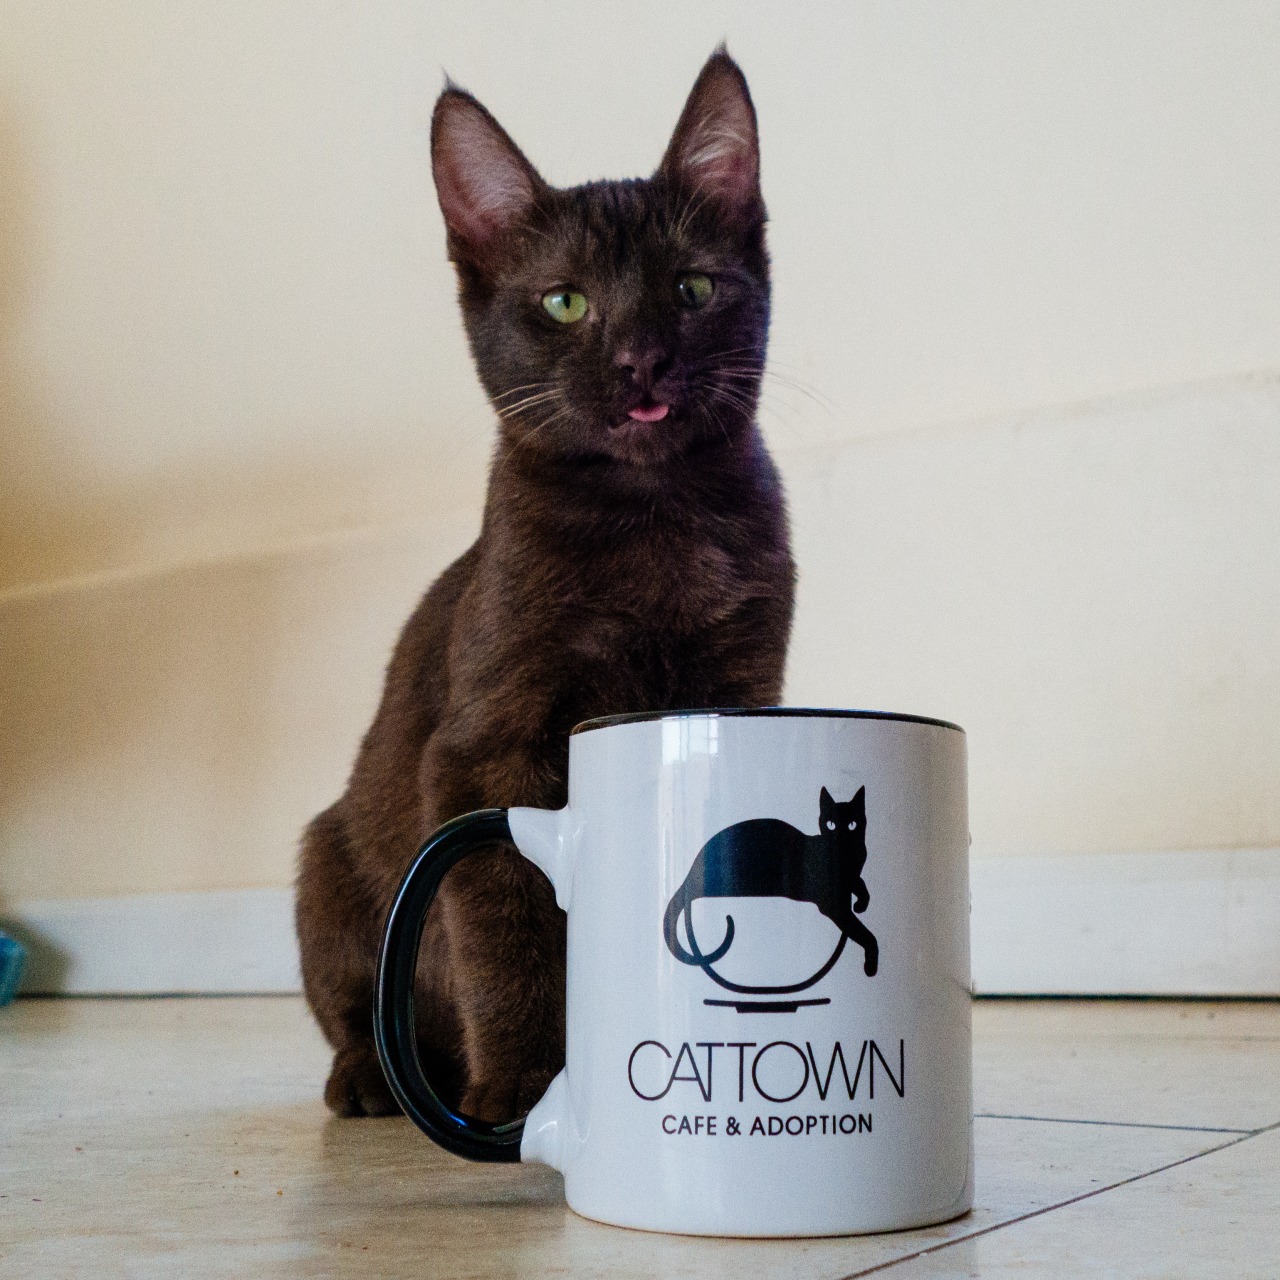 We&#8217;re excited to announce that on October 25th, 2014, we&#8217;ll be opening the doors to the Cat Town Cafe at 2869 Broadway in Oakland, CA! This will be the first cat cafe in the United States (inspired by the cafes made popular in Japan), and will enable us to empty many more cat cages from our local municipal shelter. The Cat Town Cafe will feature an area called the Cat Zone, where our cats will be free roaming and available for adoption. Visitors can spend up to an hour in the Cat Zone, and walk-ins are welcome as space allows. For a $10 donation, you can make a Cat Zone Reservation ahead of time, which ensures your visiting time is available, and supports a great cause. The cafe hours will be 8AM - 7PM Wednesday - Sunday, and the Cat Zone will be open from 10AM - 7PM. We can&#8217;t wait to start getting more cats out of the shelter and into great homes, see you in October! &gt;^. .^&lt; Ann, Adam, and all of us at Cat Town